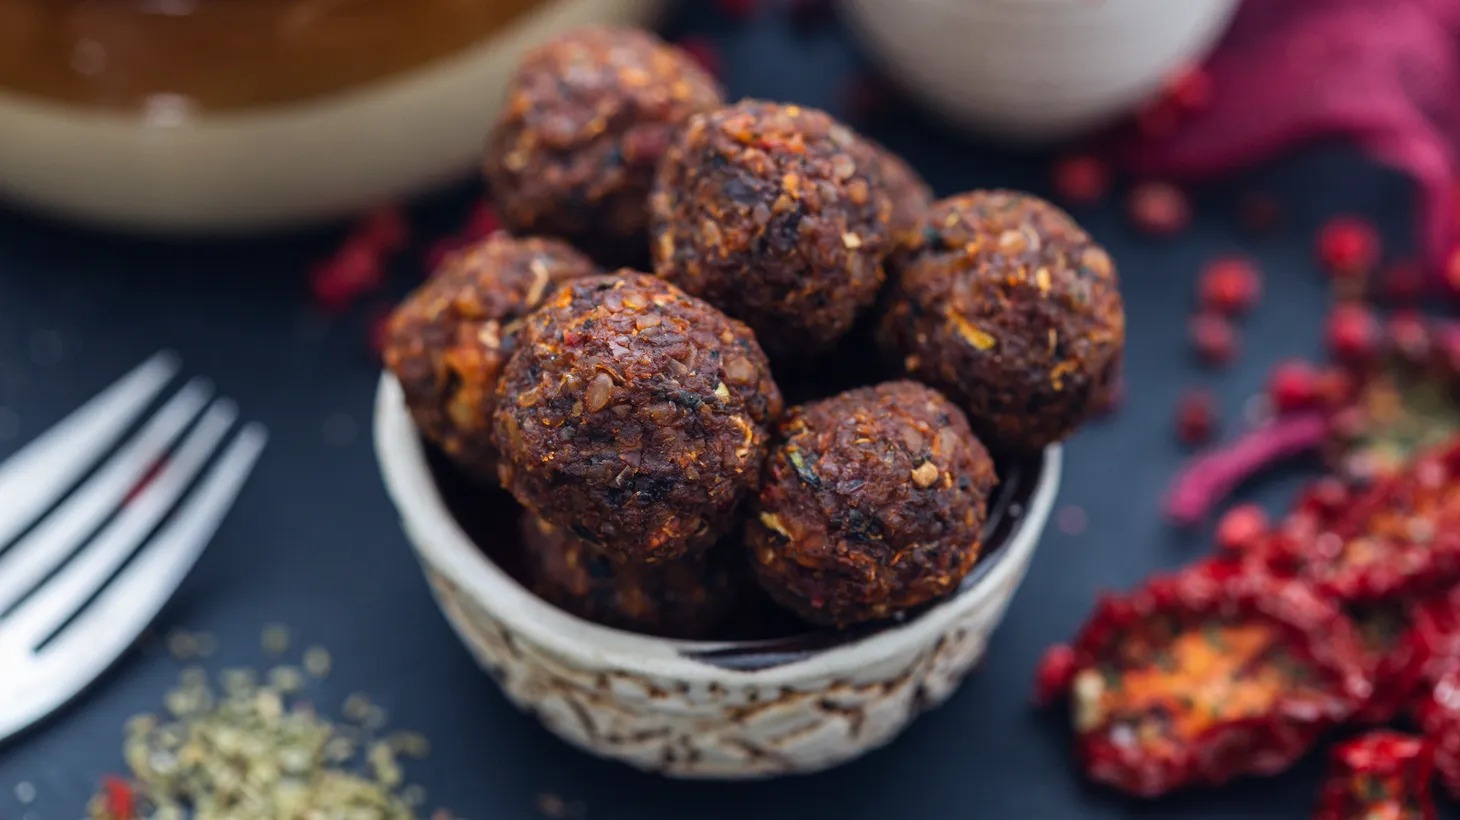 KCRW listener Rodrigo Mejia says he’s planning to use a plant-based meat alternative to make vegan meatballs like these for albondigas. He hasn’t had the meat version in 15 years.